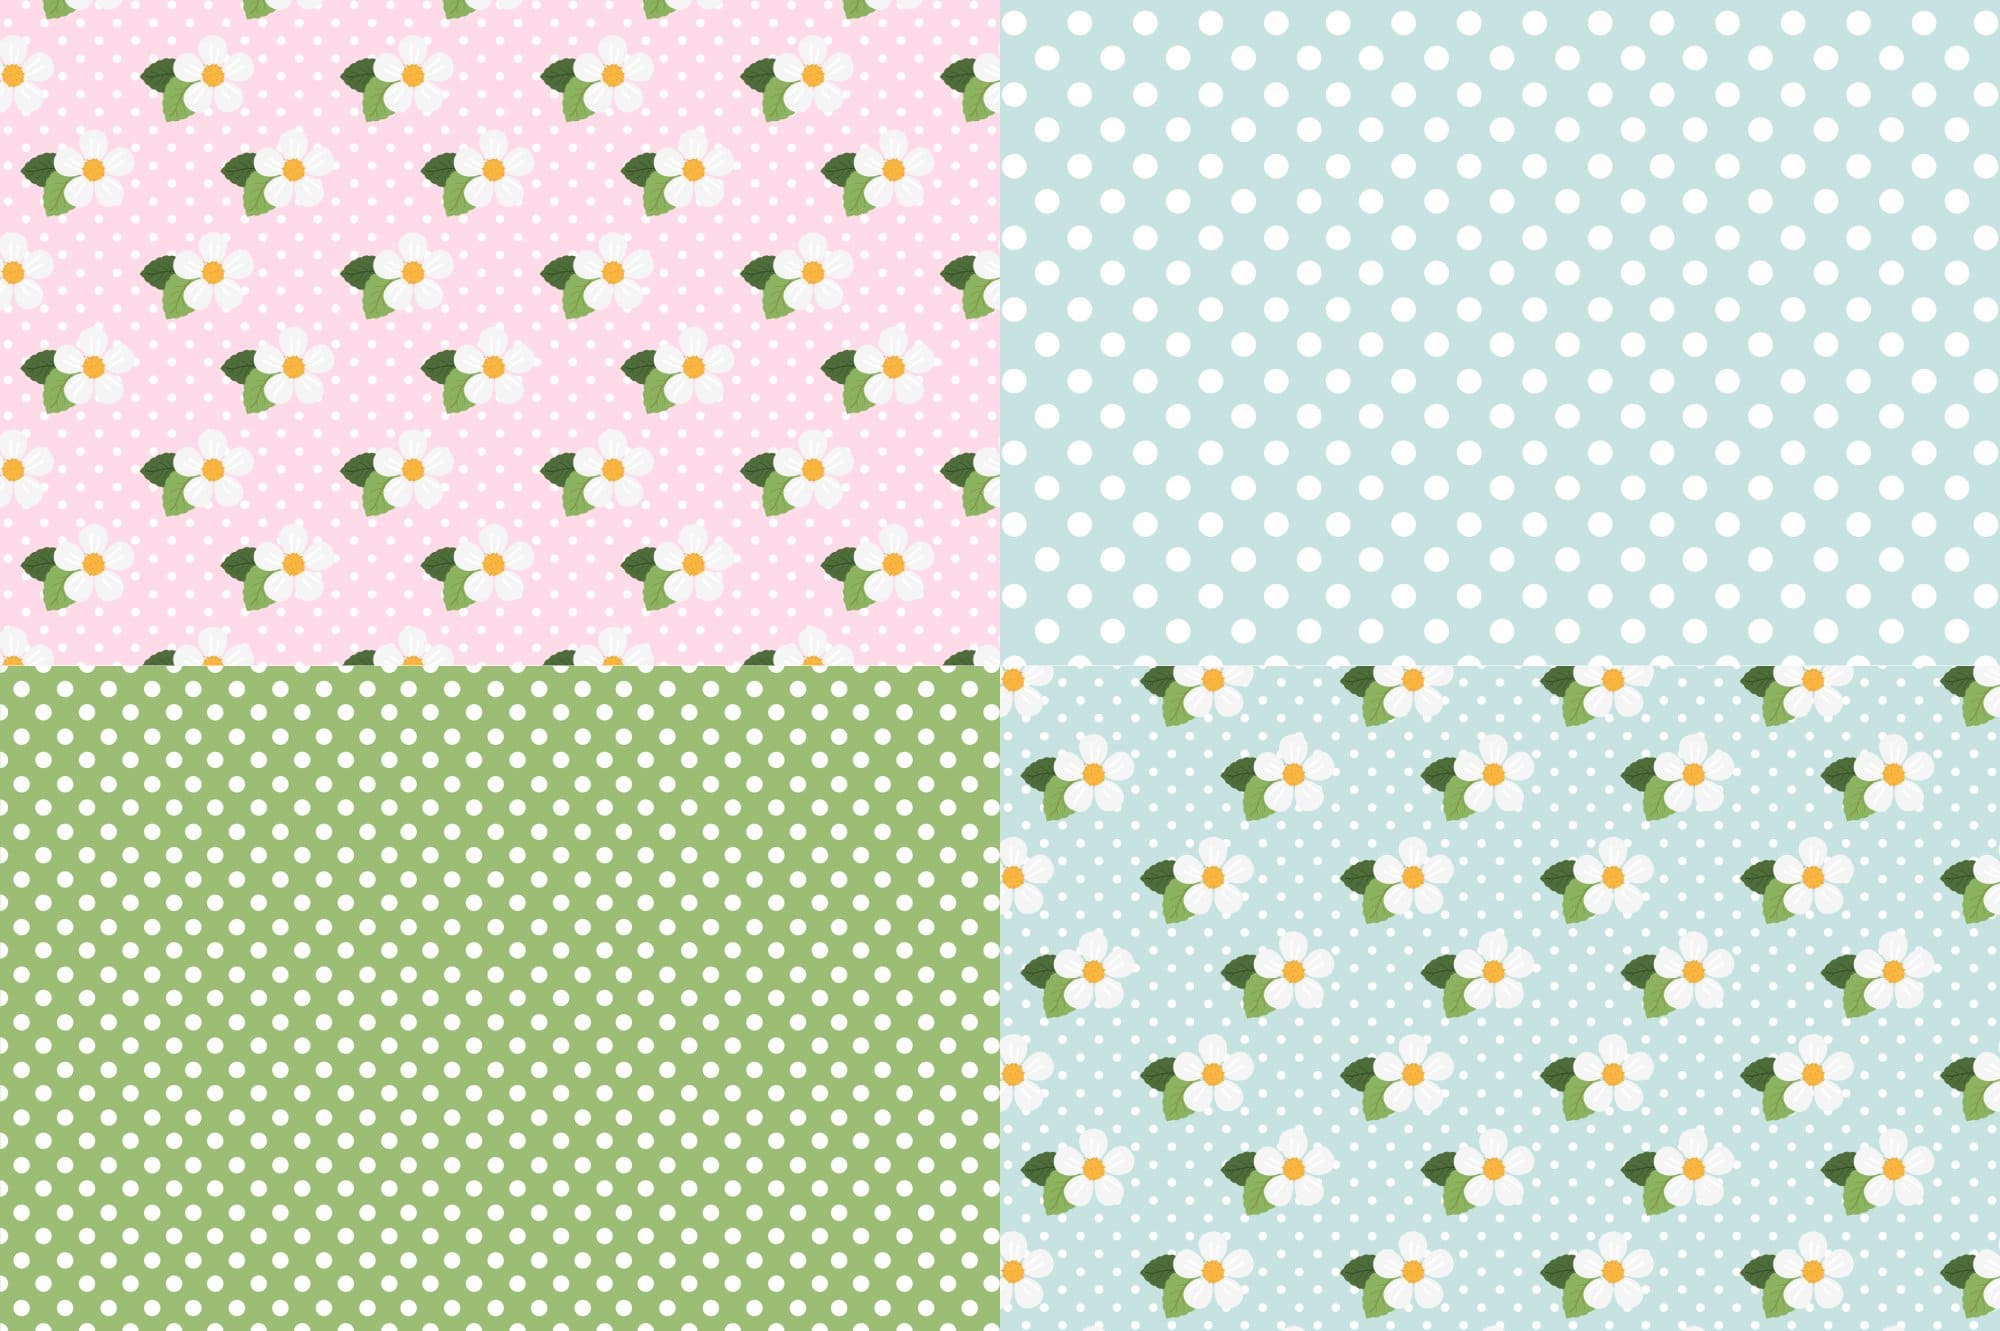 Two geometric patterns in dots, two patterns with white flowers.